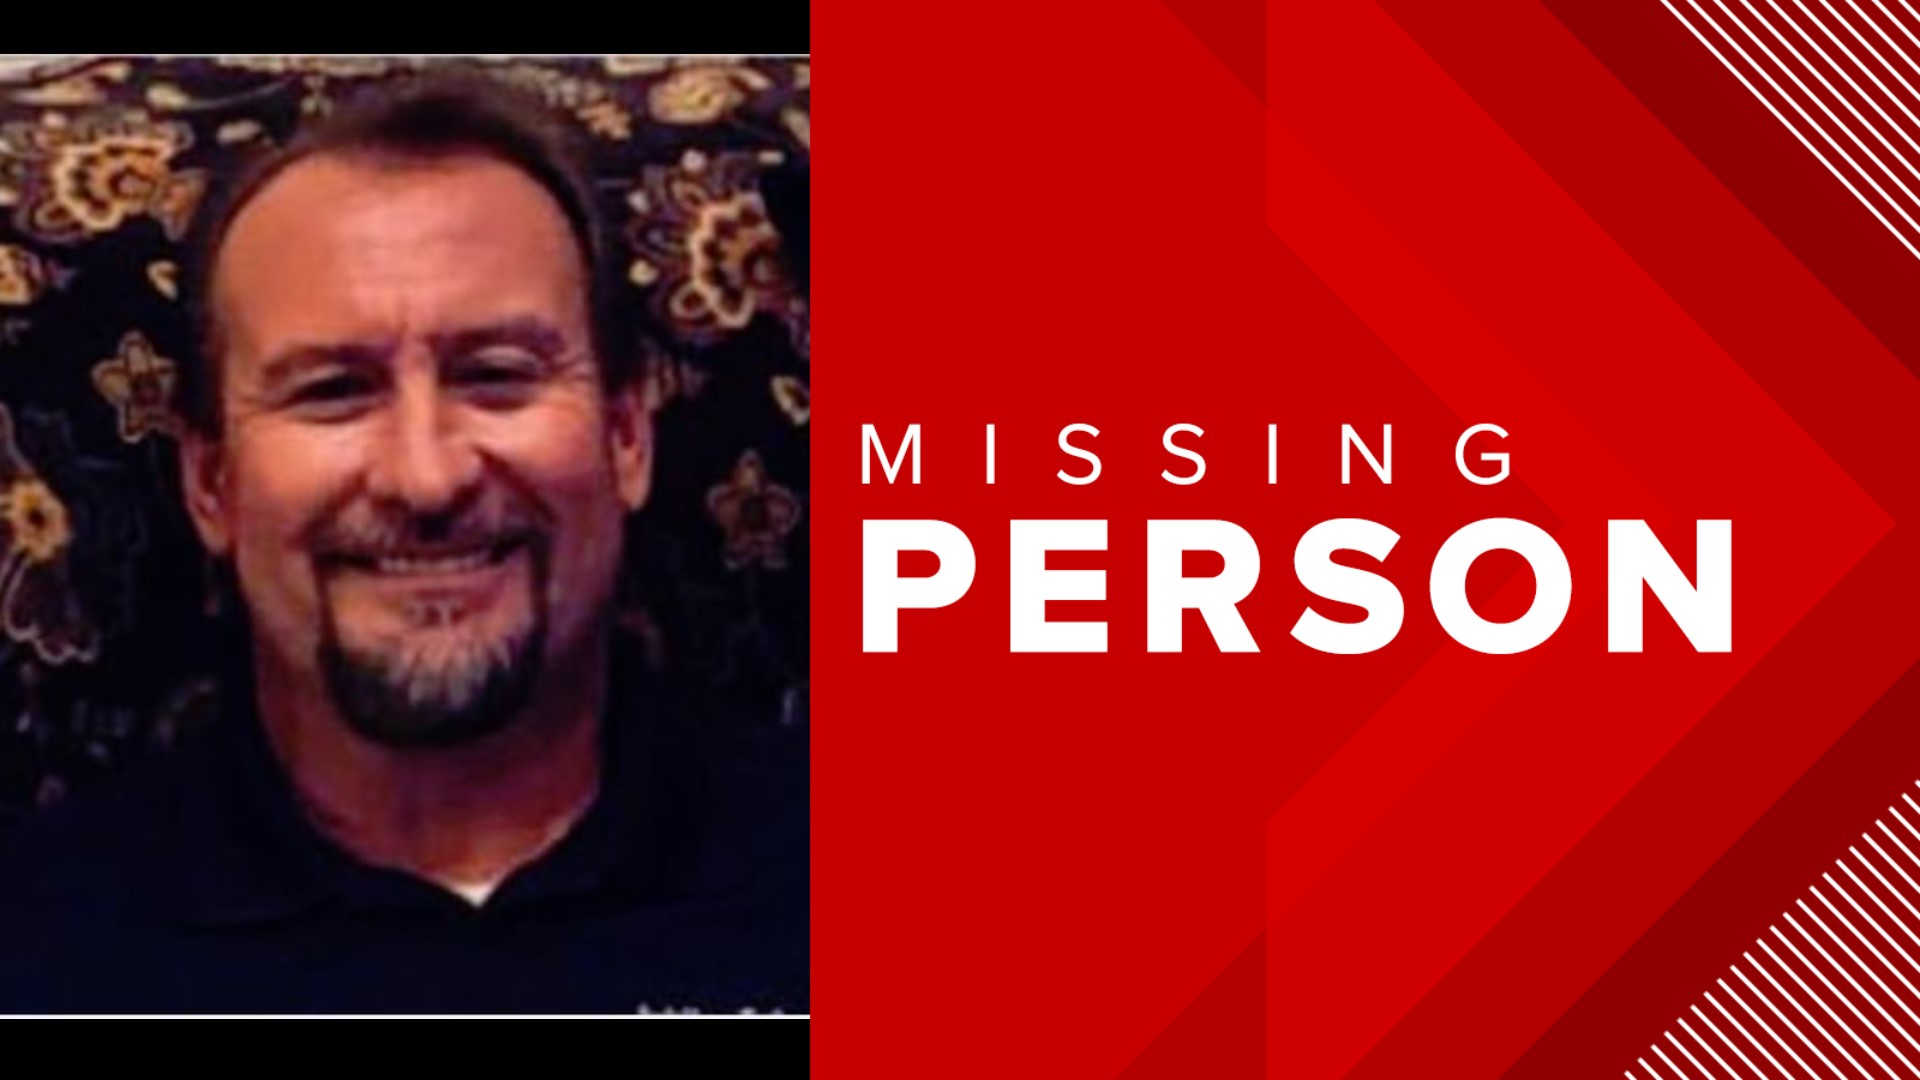 Darrin Locking has been missing since June 1. His family told police he drives a silver Volkswagen sedan, with Texas license plate LFP-4361.